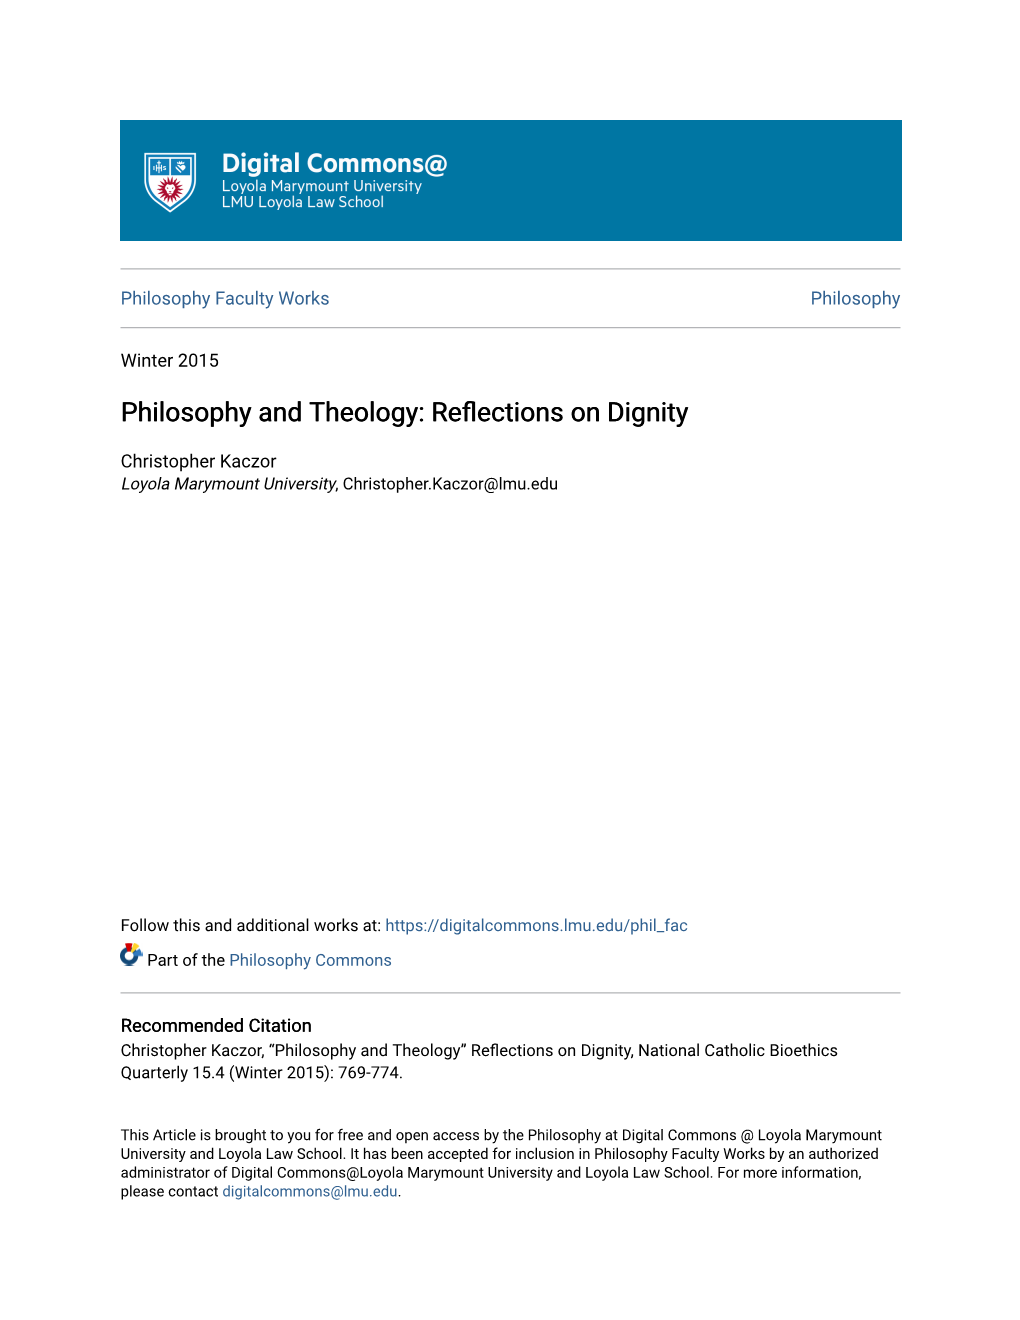 Philosophy and Theology: Reflections on Dignity